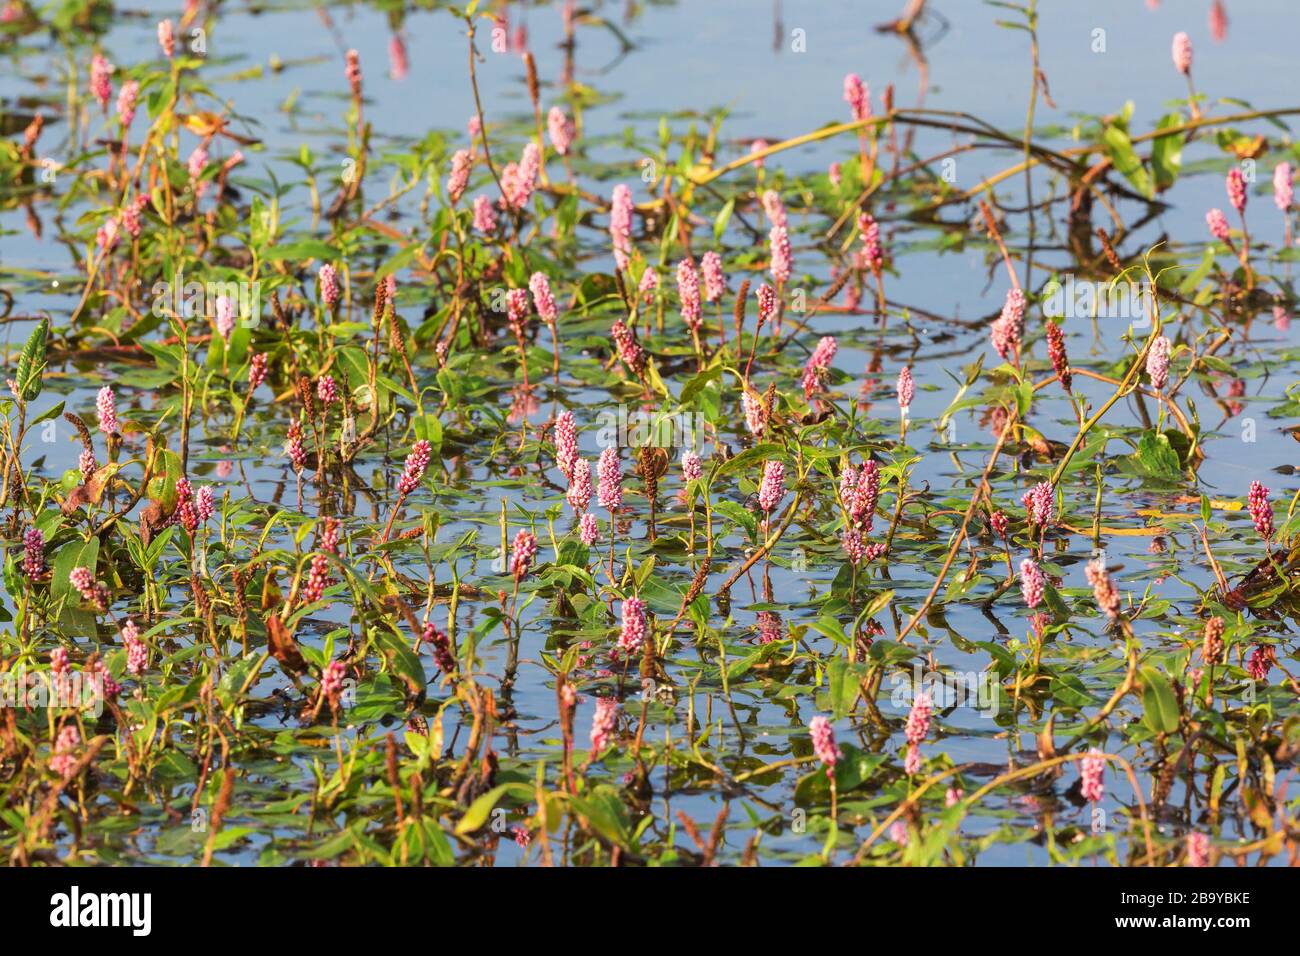 Many Amphibious Bistort flowers growing in the water Stock Photo